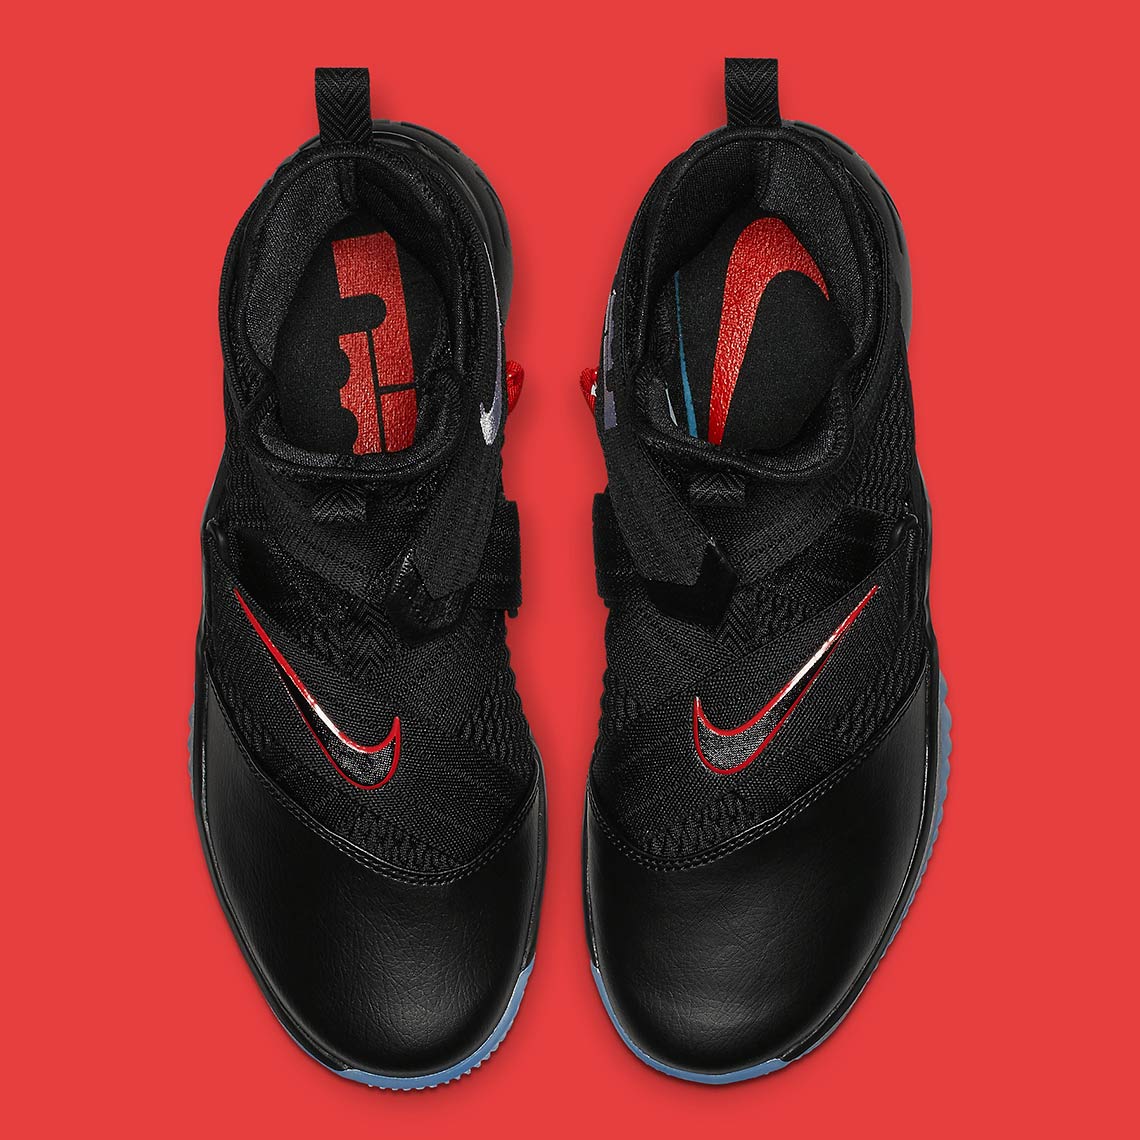 soldier 12 bred